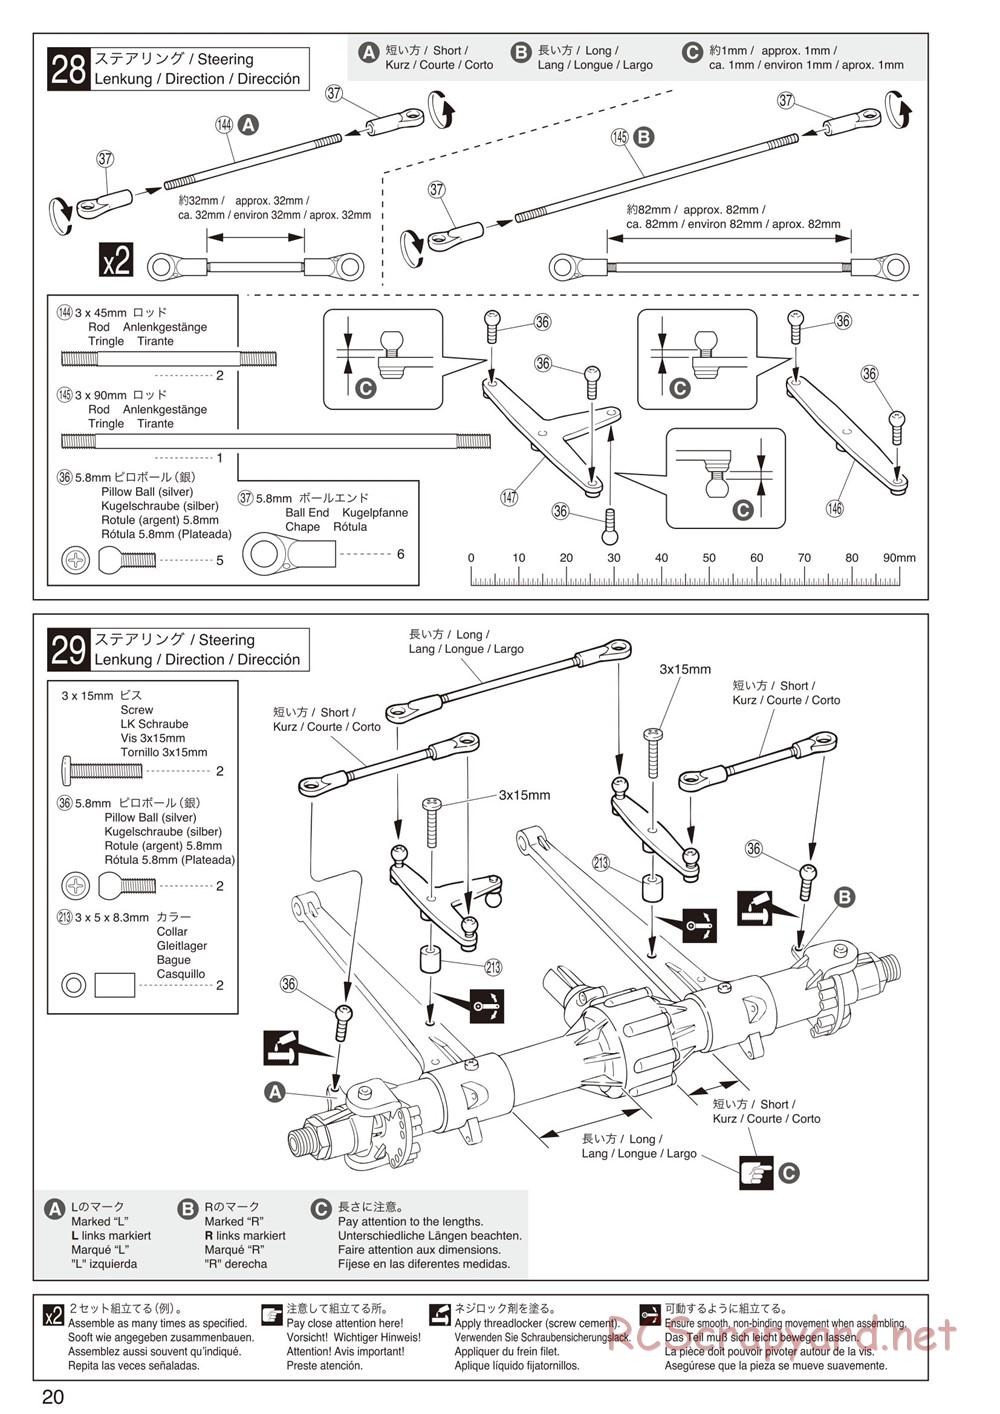 Kyosho - FO-XX VE - Manual - Page 20